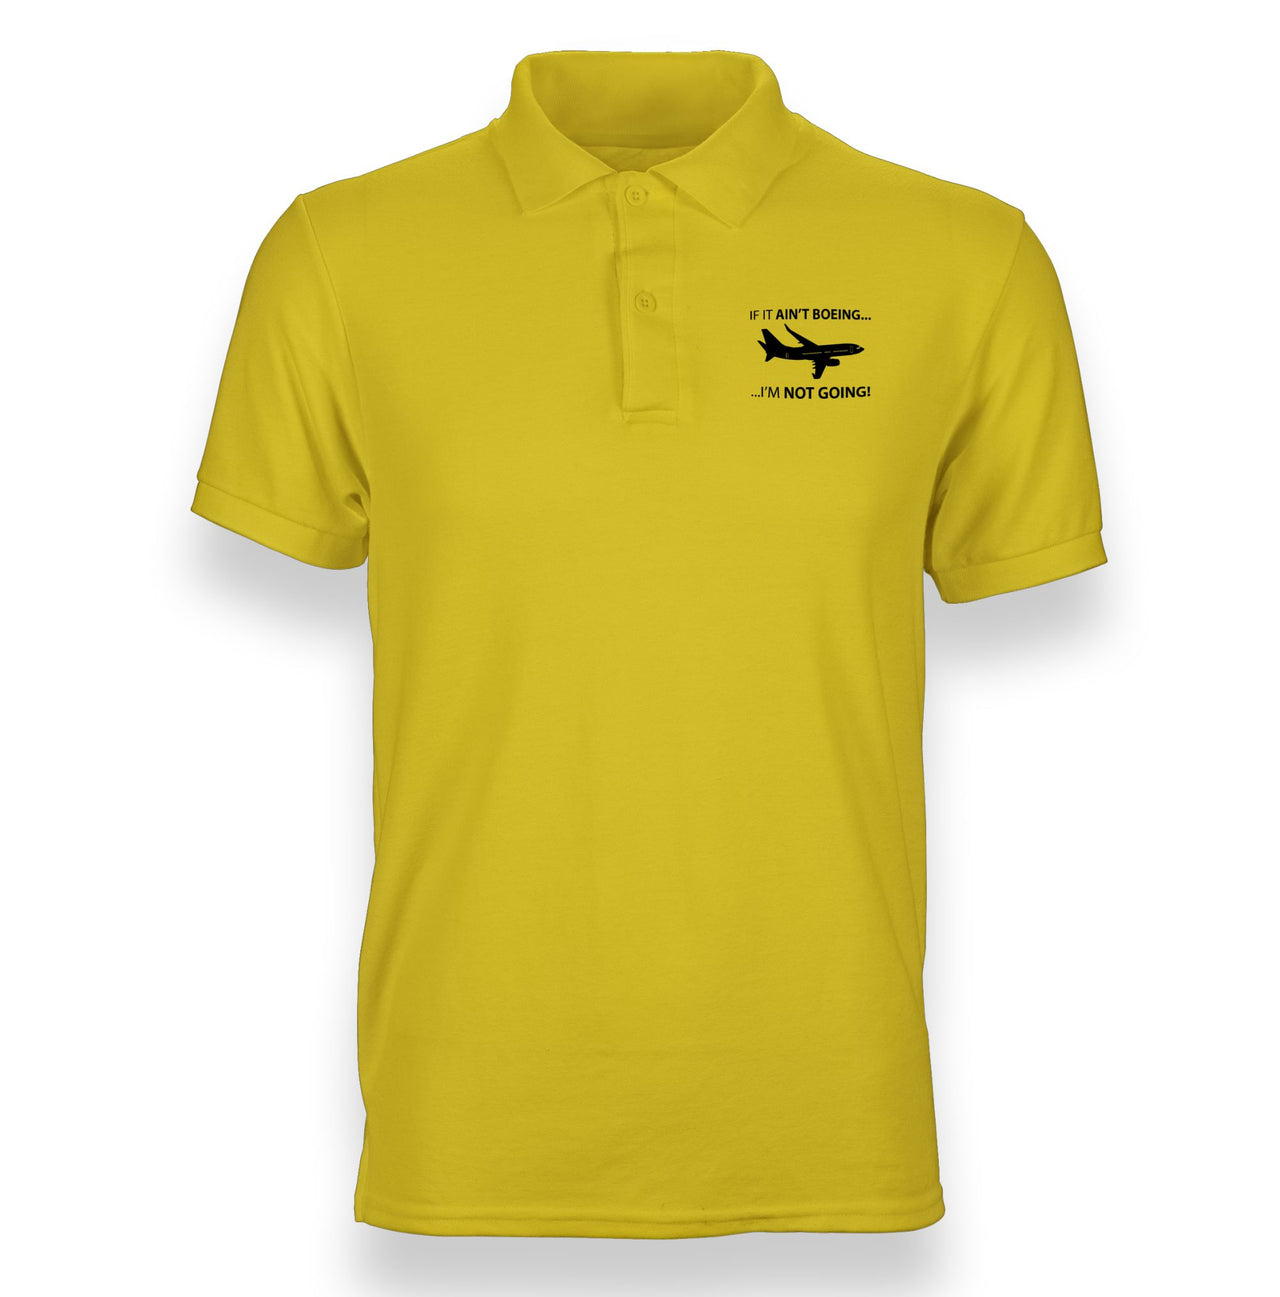 If It Ain't Boeing I'm Not Going! Designed "WOMEN" Polo T-Shirts